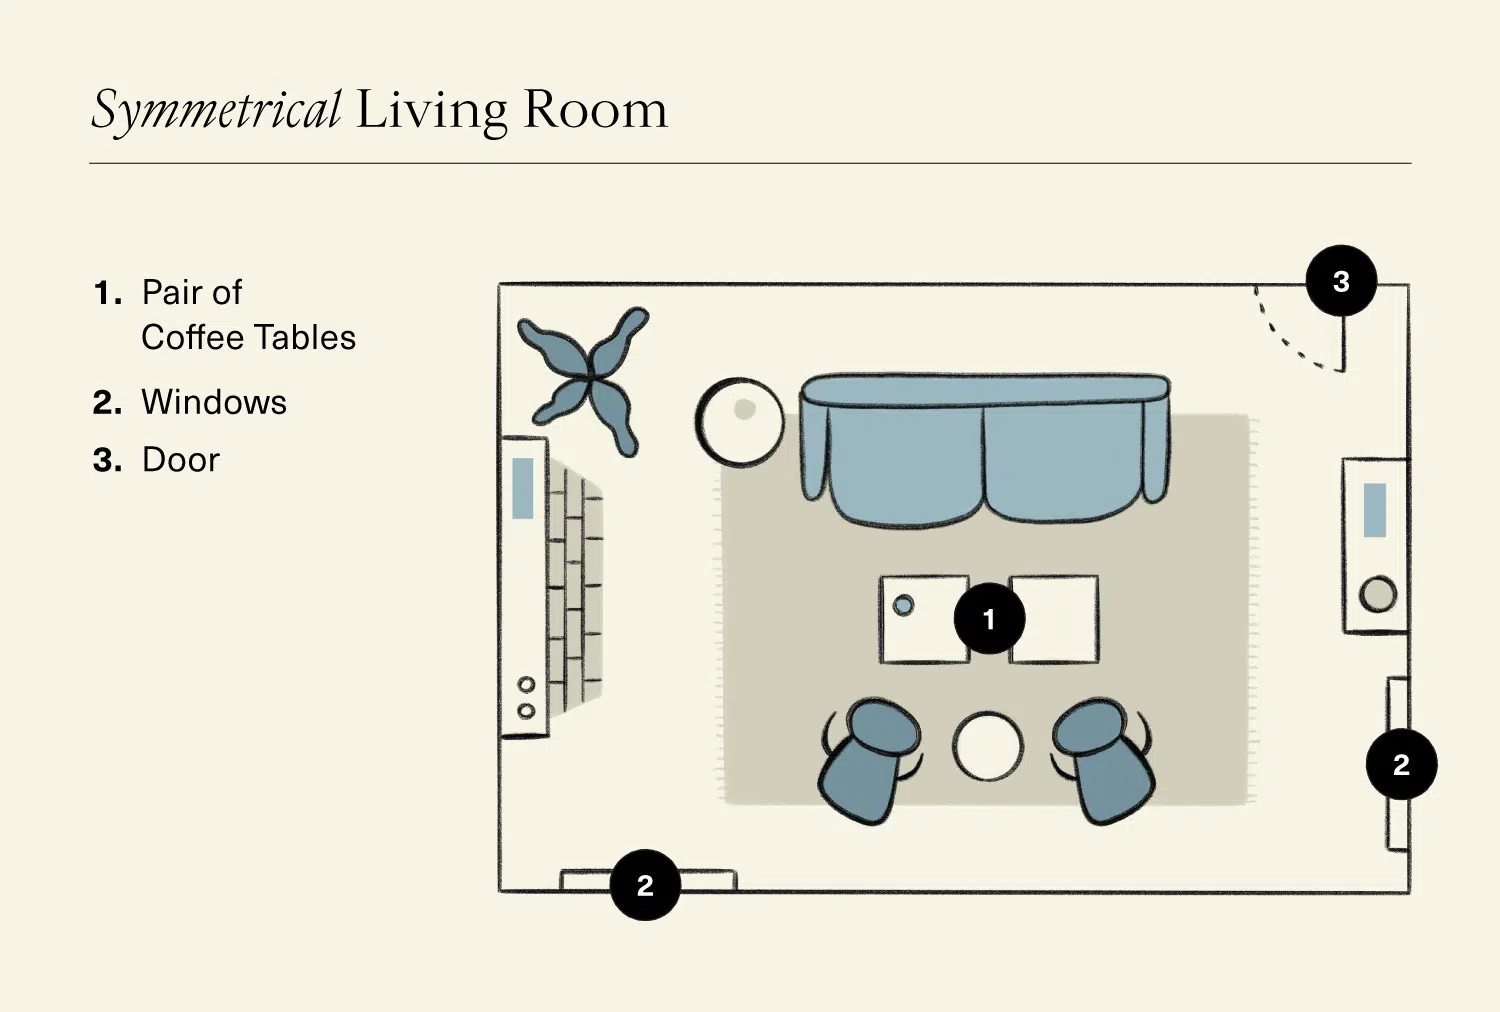 How to Arrange Furniture: Illustration of Living Room Featuring Symmetrical Layout 